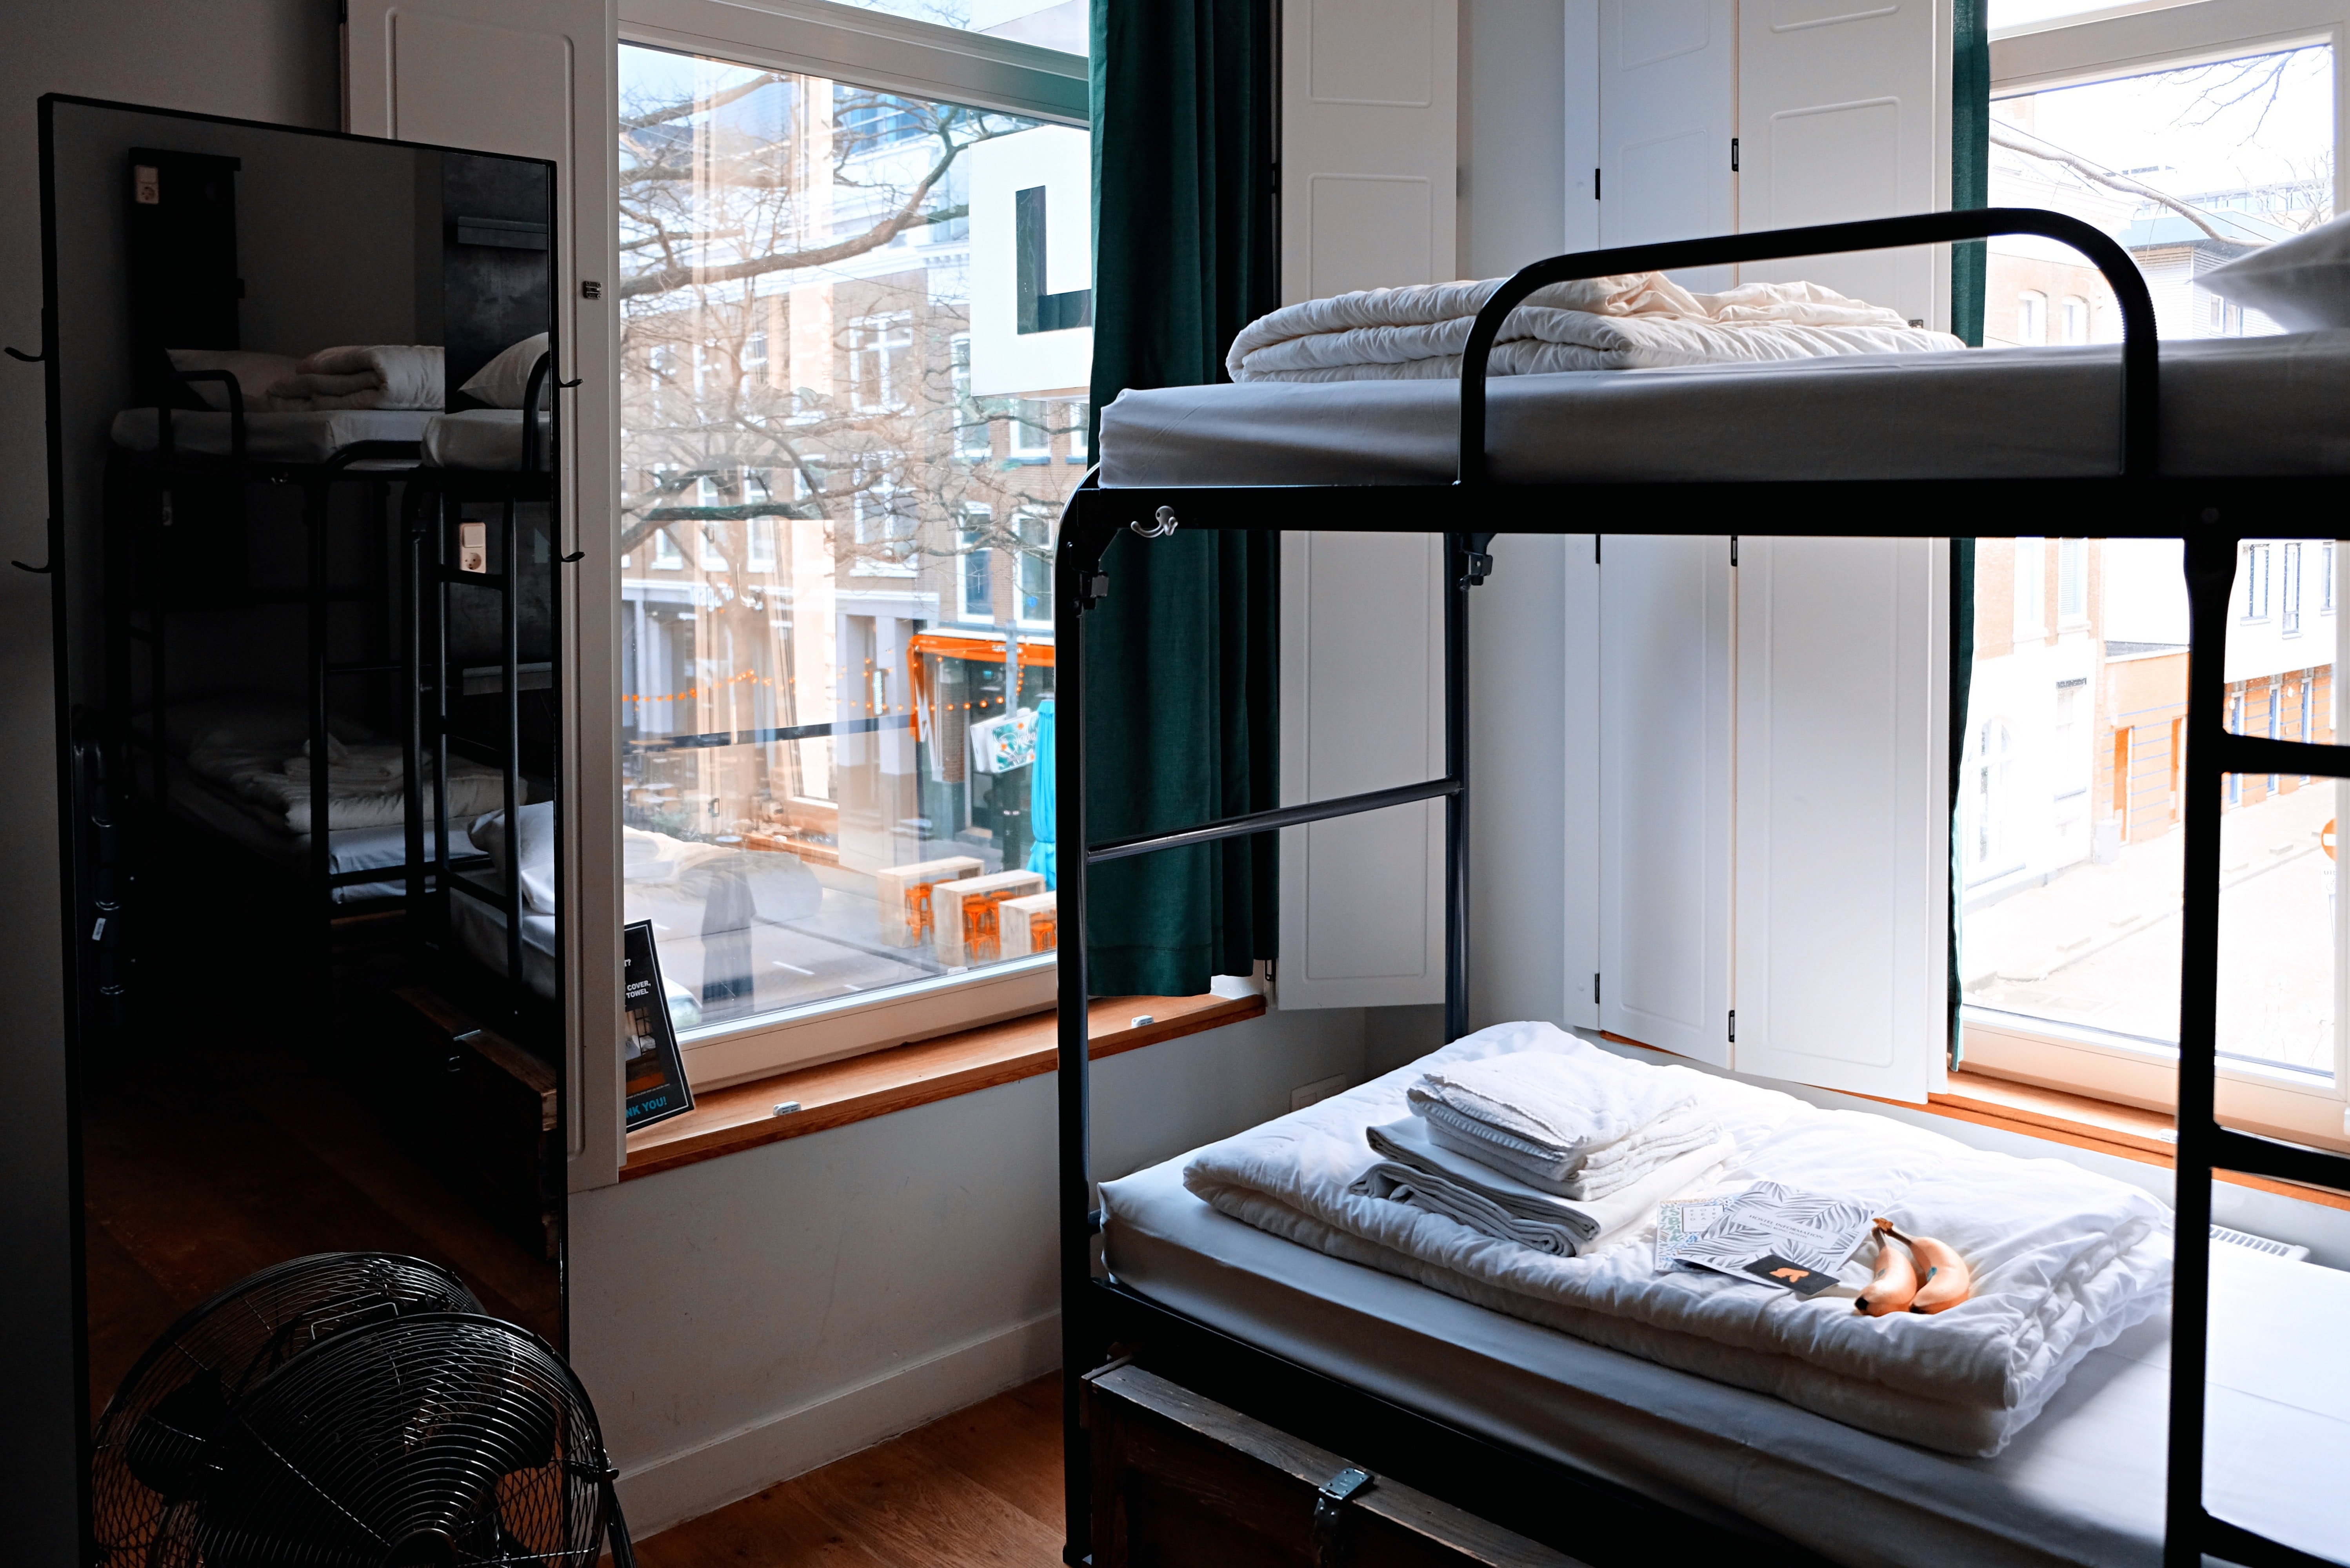 bunk beds in a room with large windows